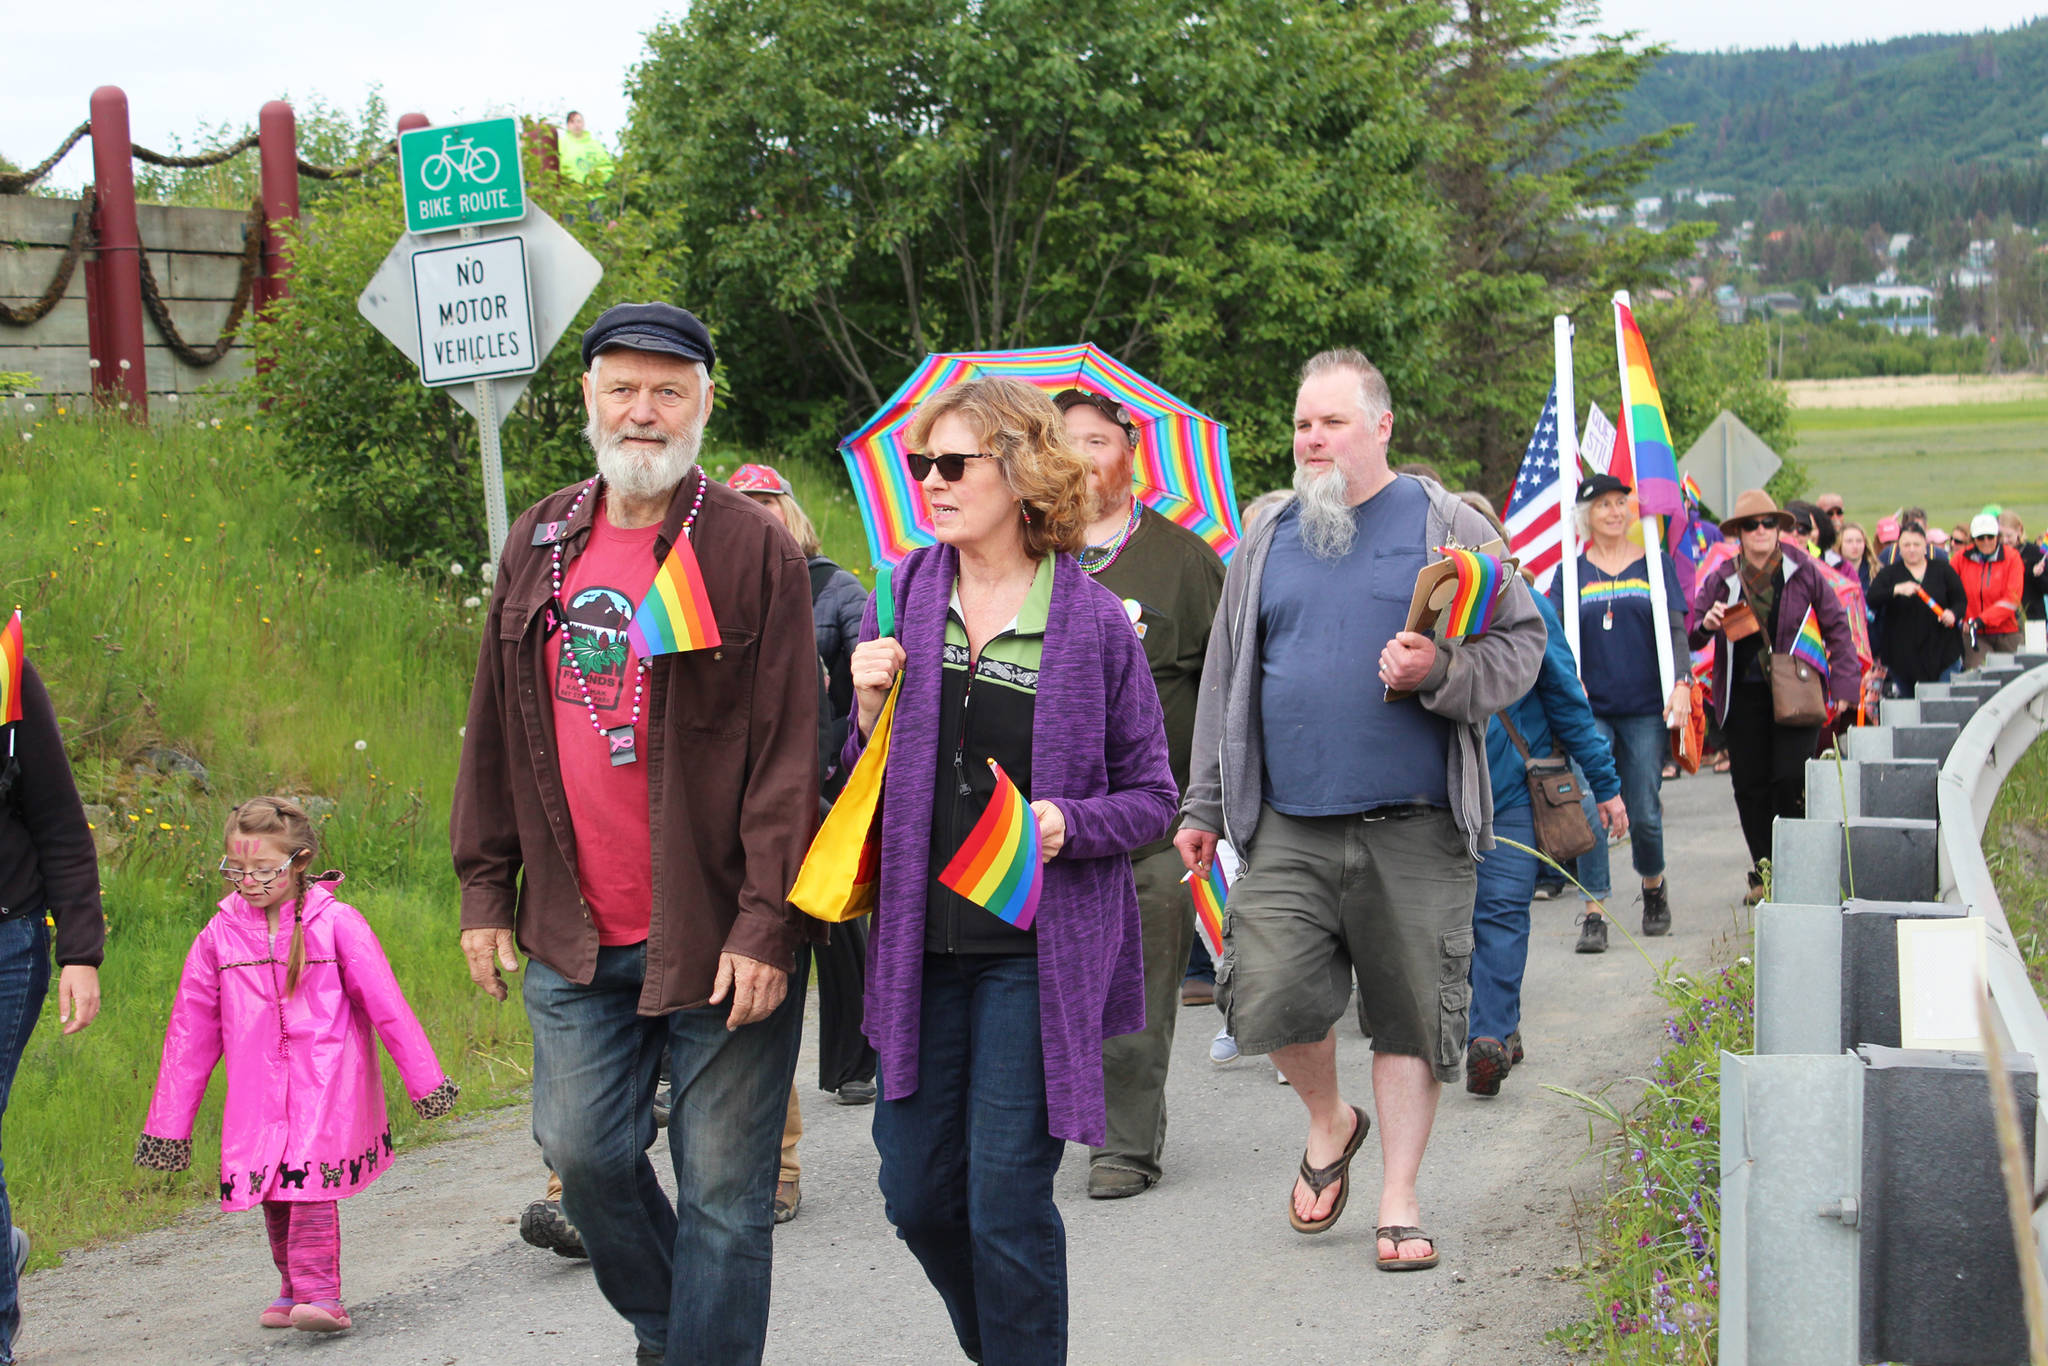 Rep. Paul Seaton (R-Homer) walks with his wife, Tina, along Ocean Drive during Homer’s first Pride March on Saturday, June 23, 2018 in Homer, Alaska. Several representatives of local government and the clergy participated in the march. (Photo by Megan Pacer/Homer News)